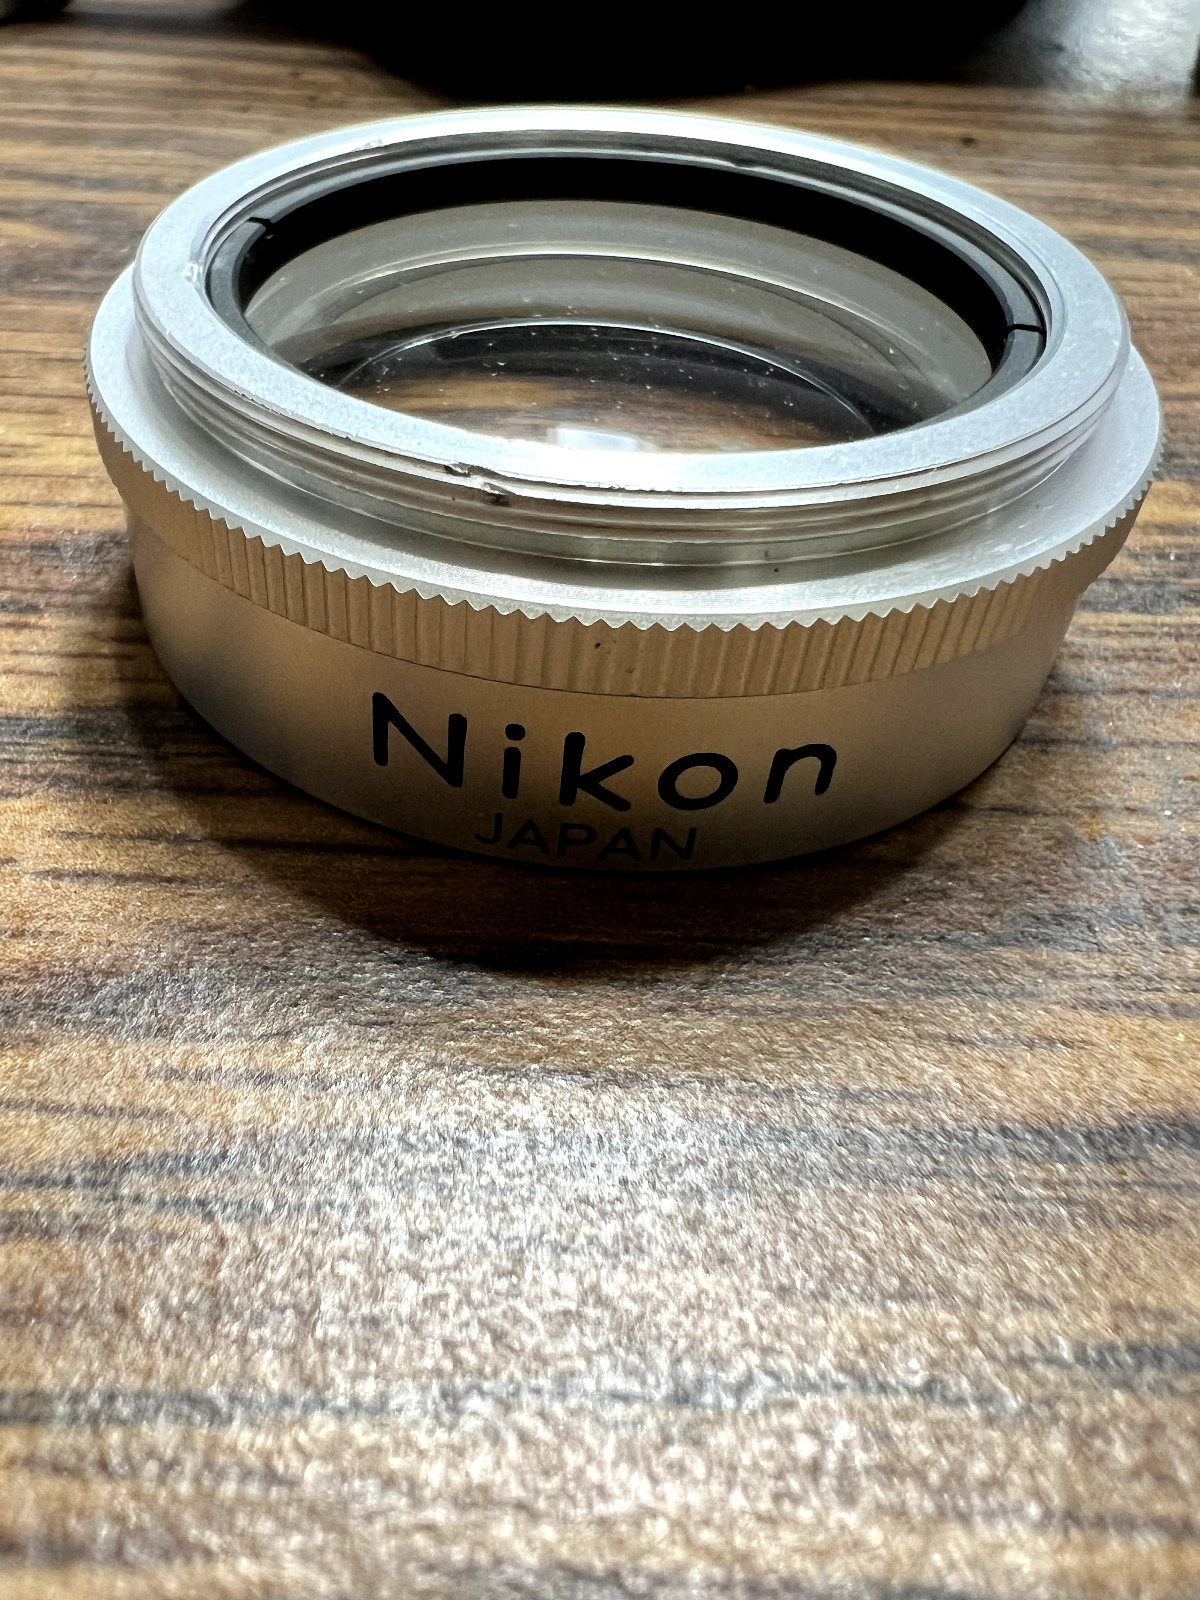 Nikon MX A 20230 Auxiliary 0.7X Objective Lens for Stereo Zoom Microscopes USED